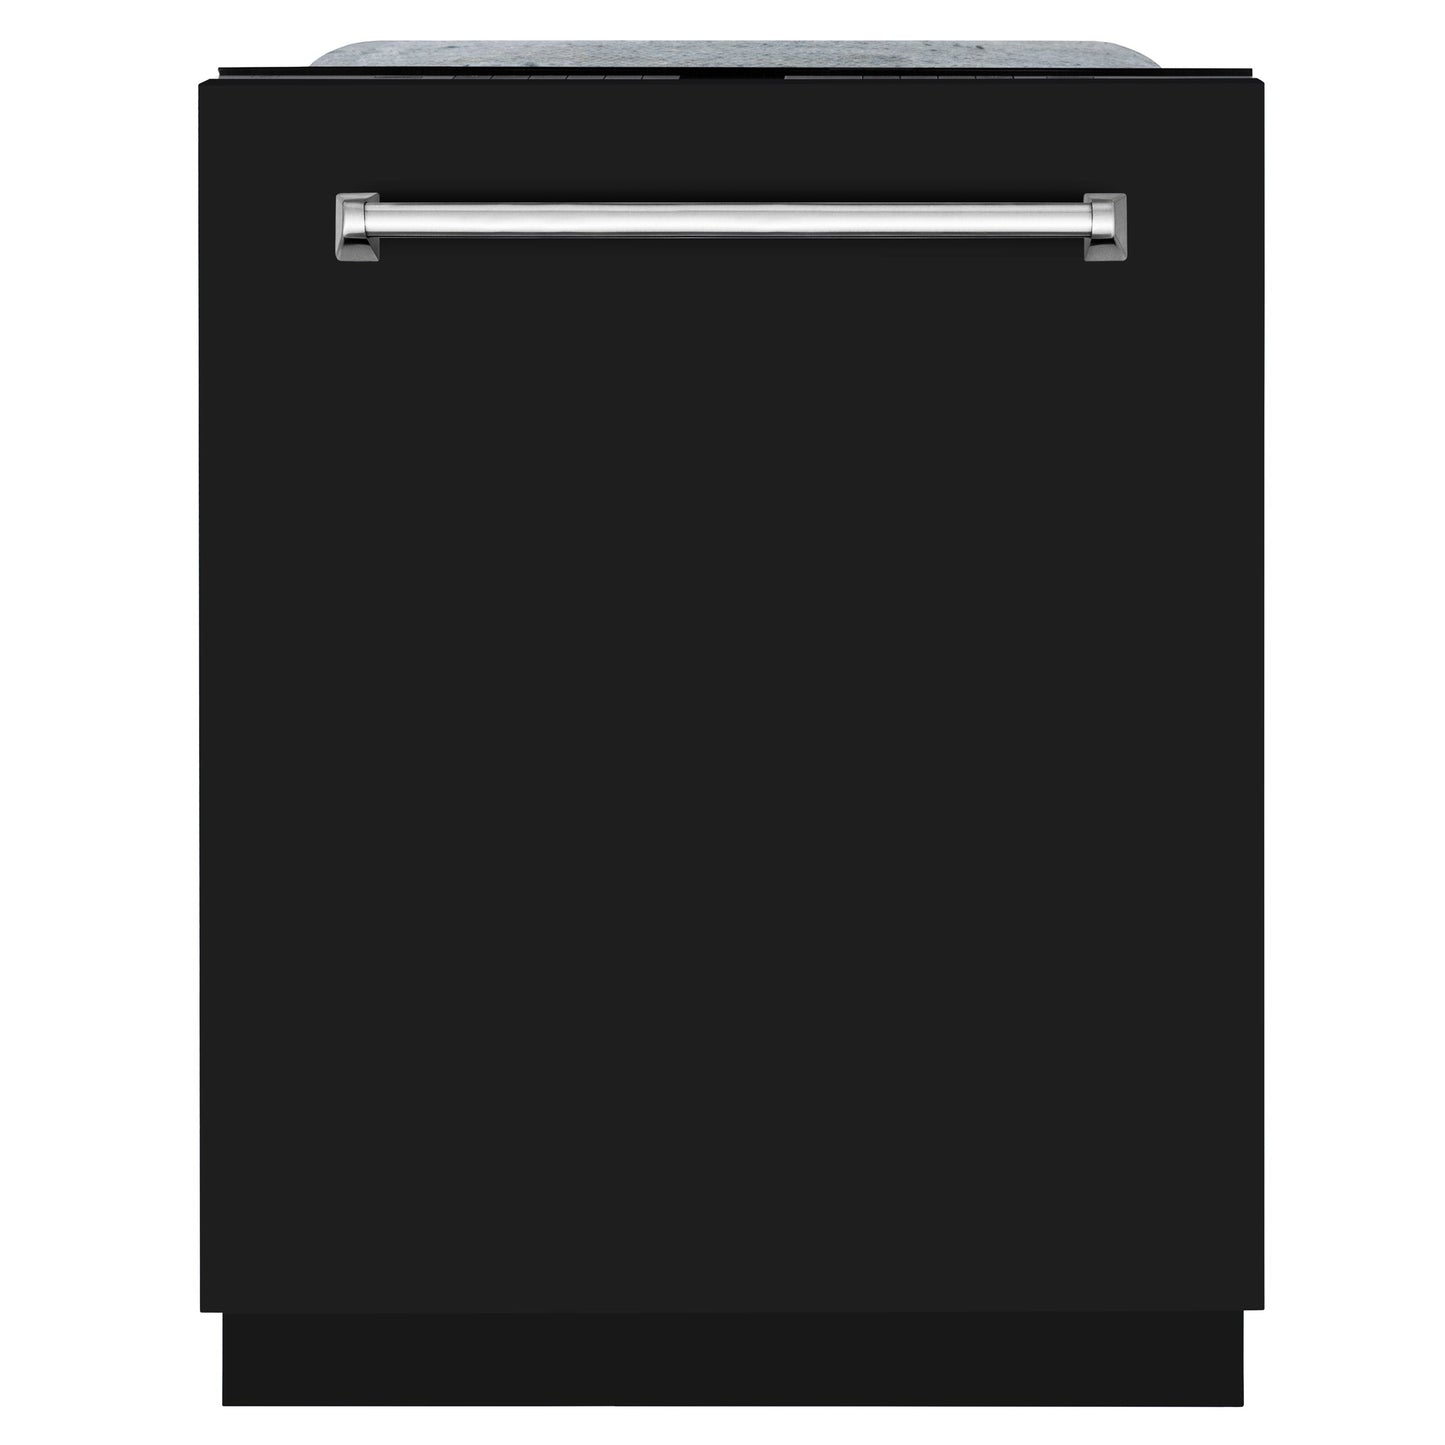 ZLINE 24 In. Monument Series 3rd Rack Top Touch Control Dishwasher in Black Matte, 45dBa